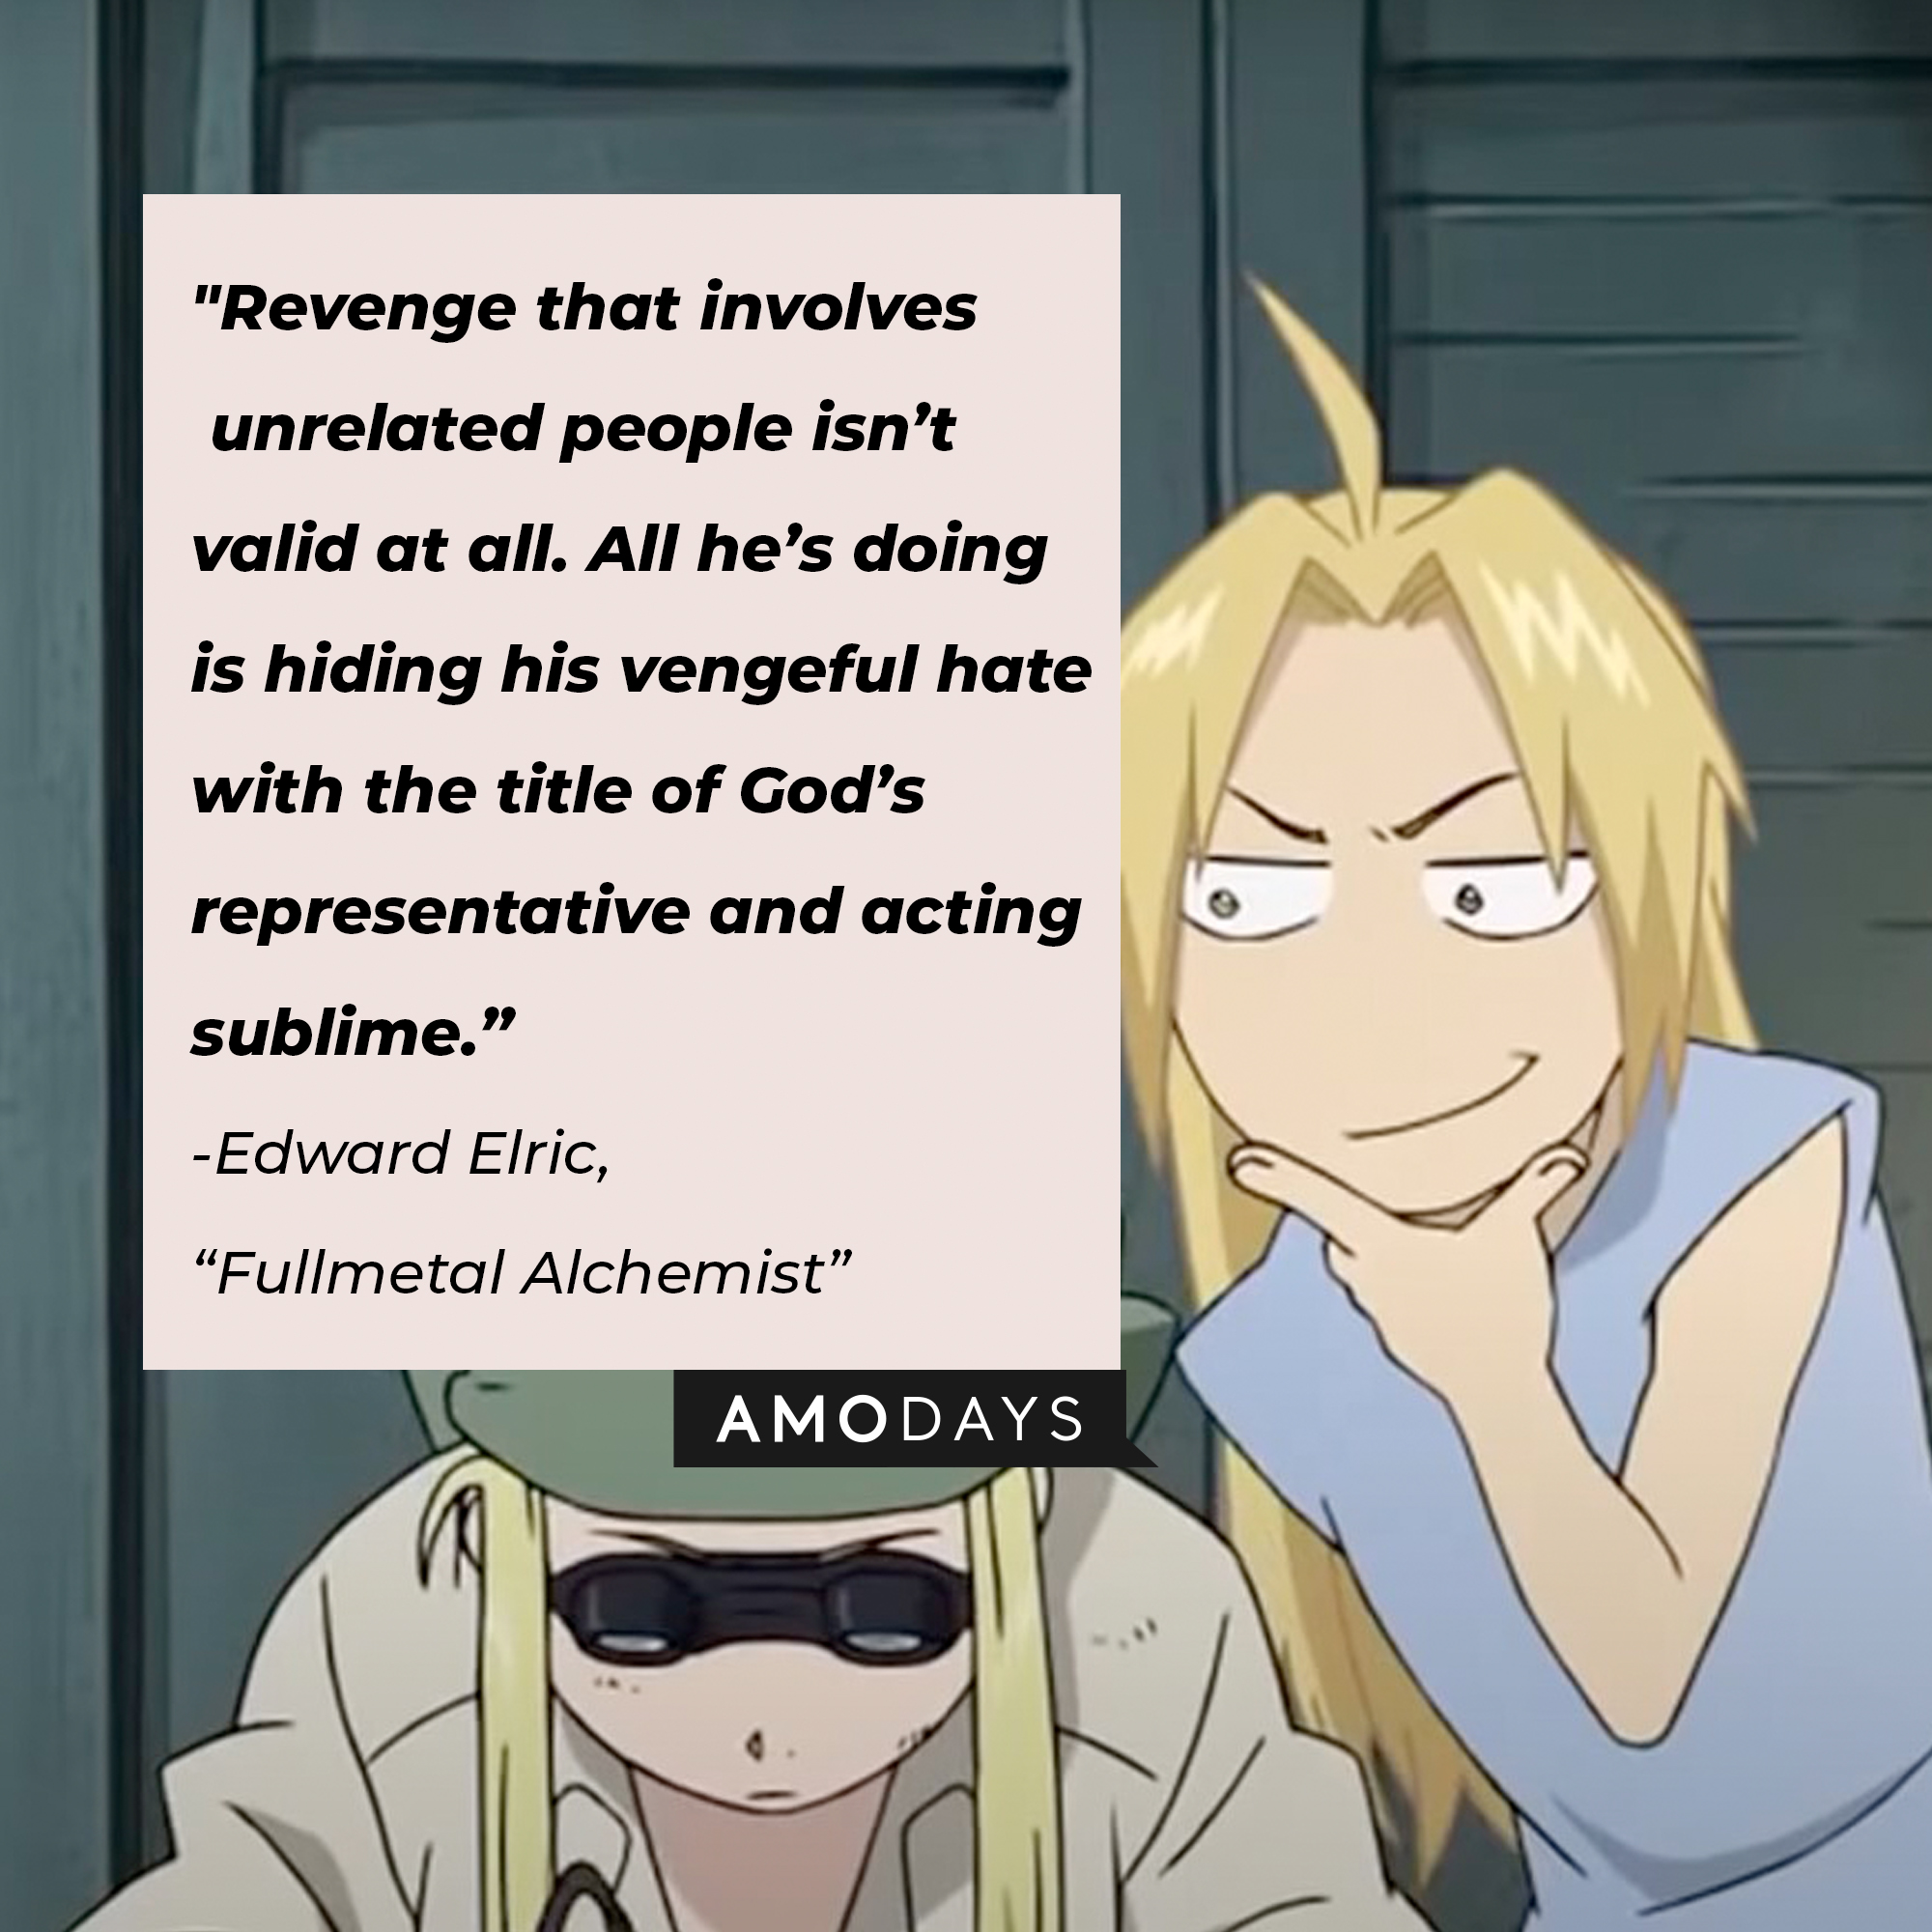 Edward Elric's quote: "Revenge that involves unrelated people isn’t valid at all. All he’s doing is hiding his vengeful hate with the title of God’s representative and acting sublime.” | Image: facebook.com/FMAHiromuArakawa